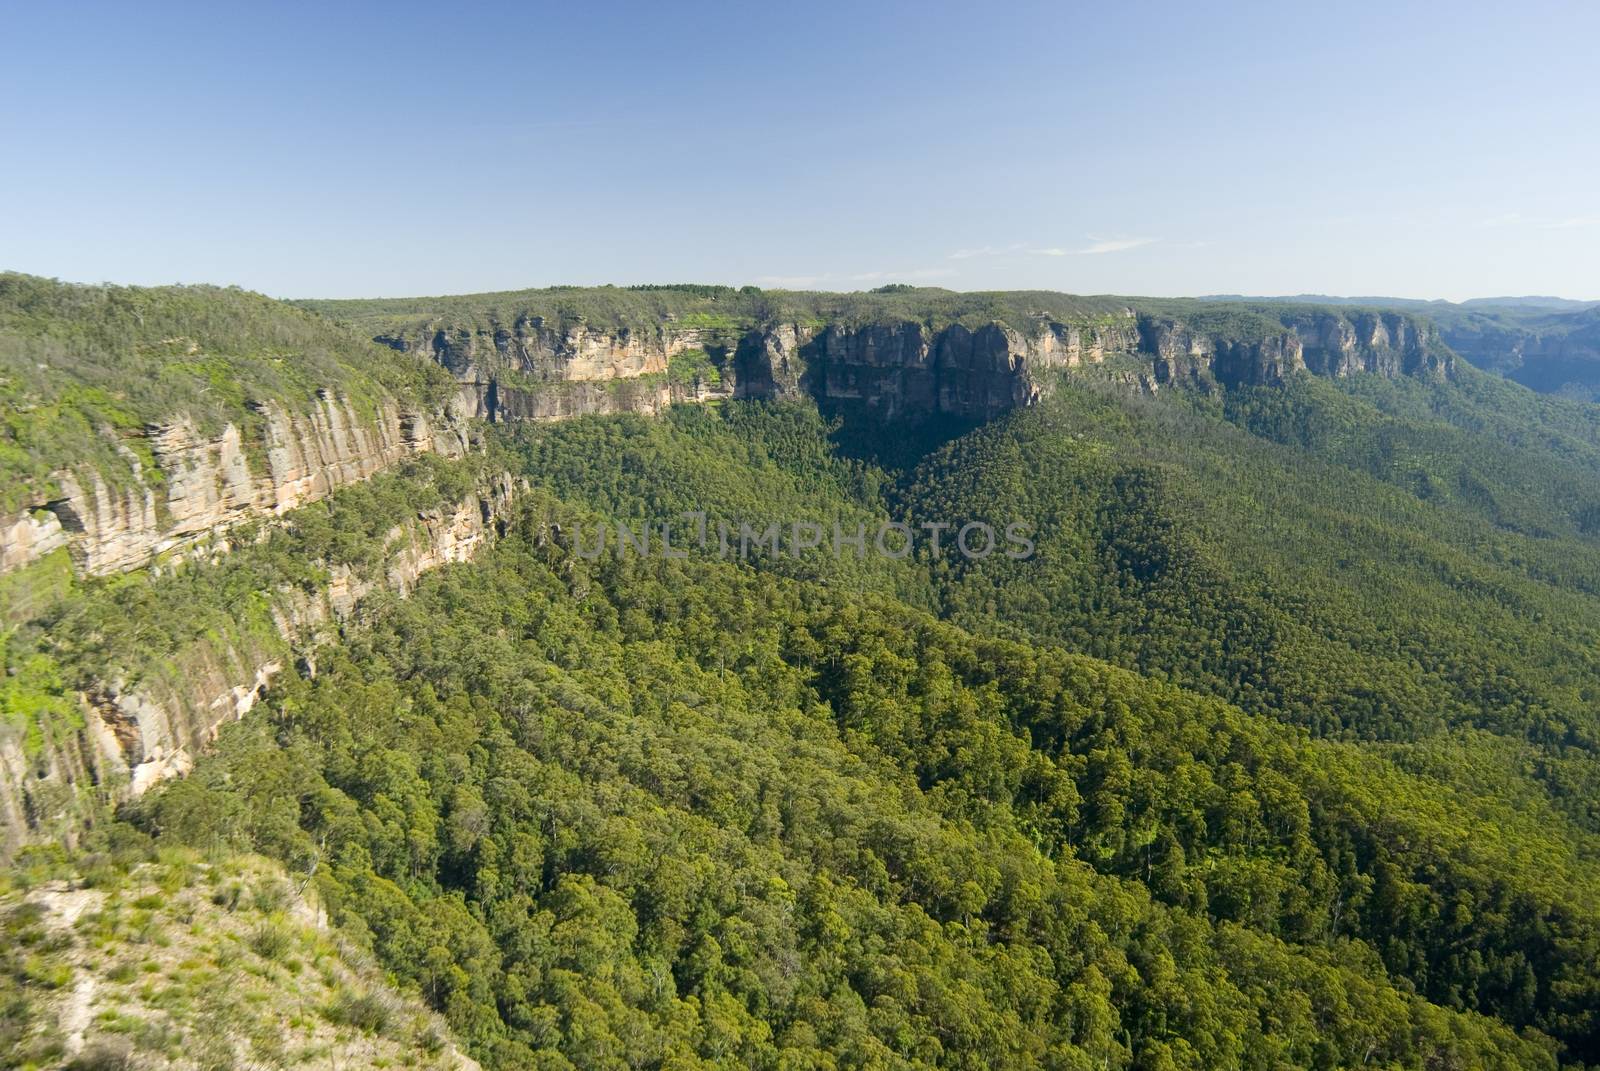 Scenic view of an escarpment in the Blue Mountains, NSW, Australia with forested slopes forming the Grose Valley